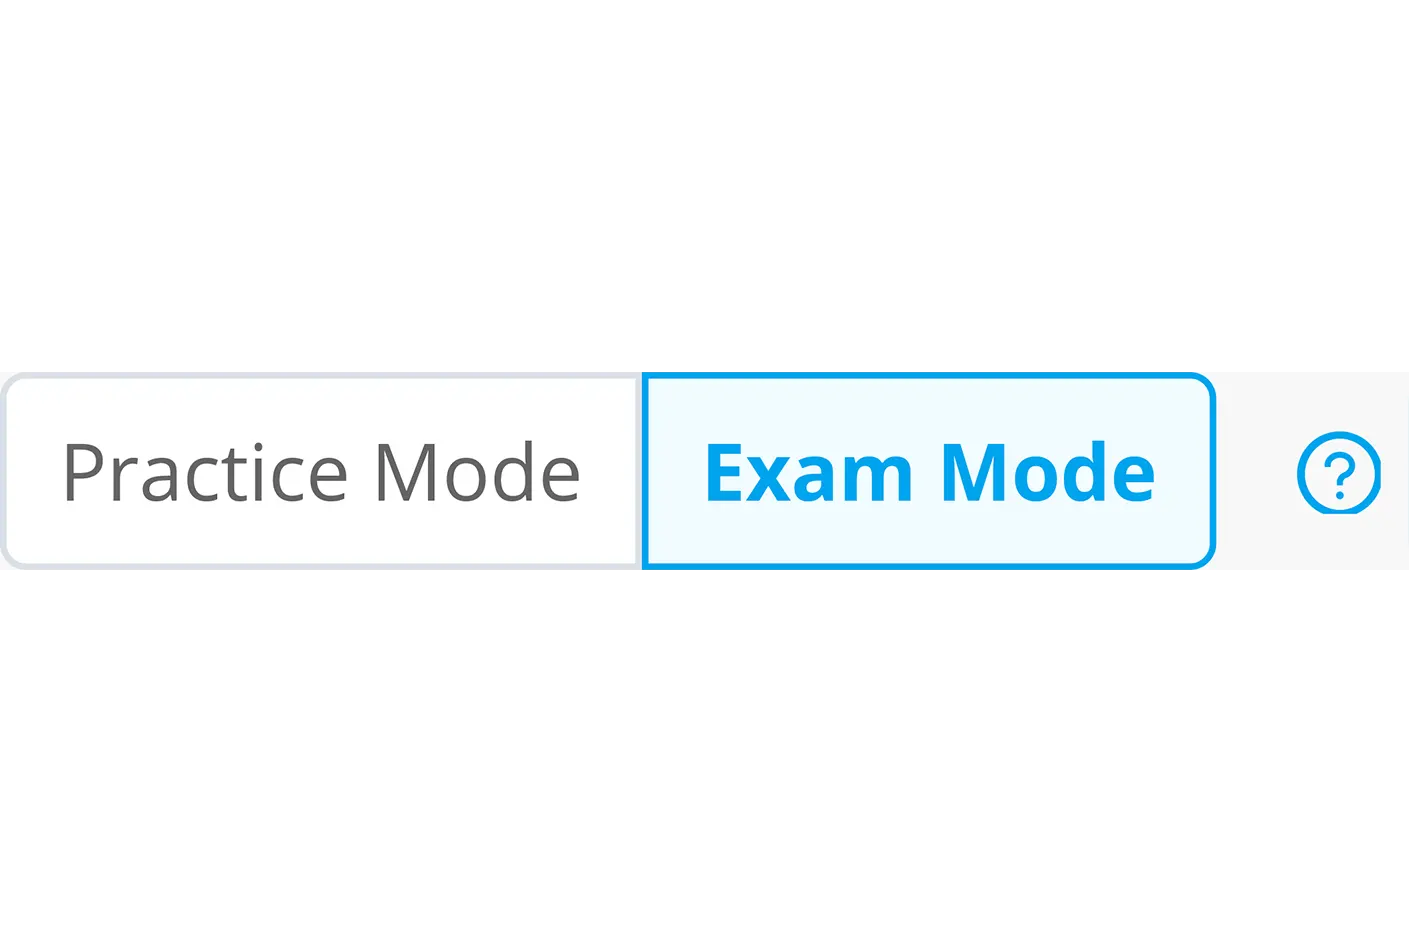 There is a screenshot of exam mode select for University Test practice test